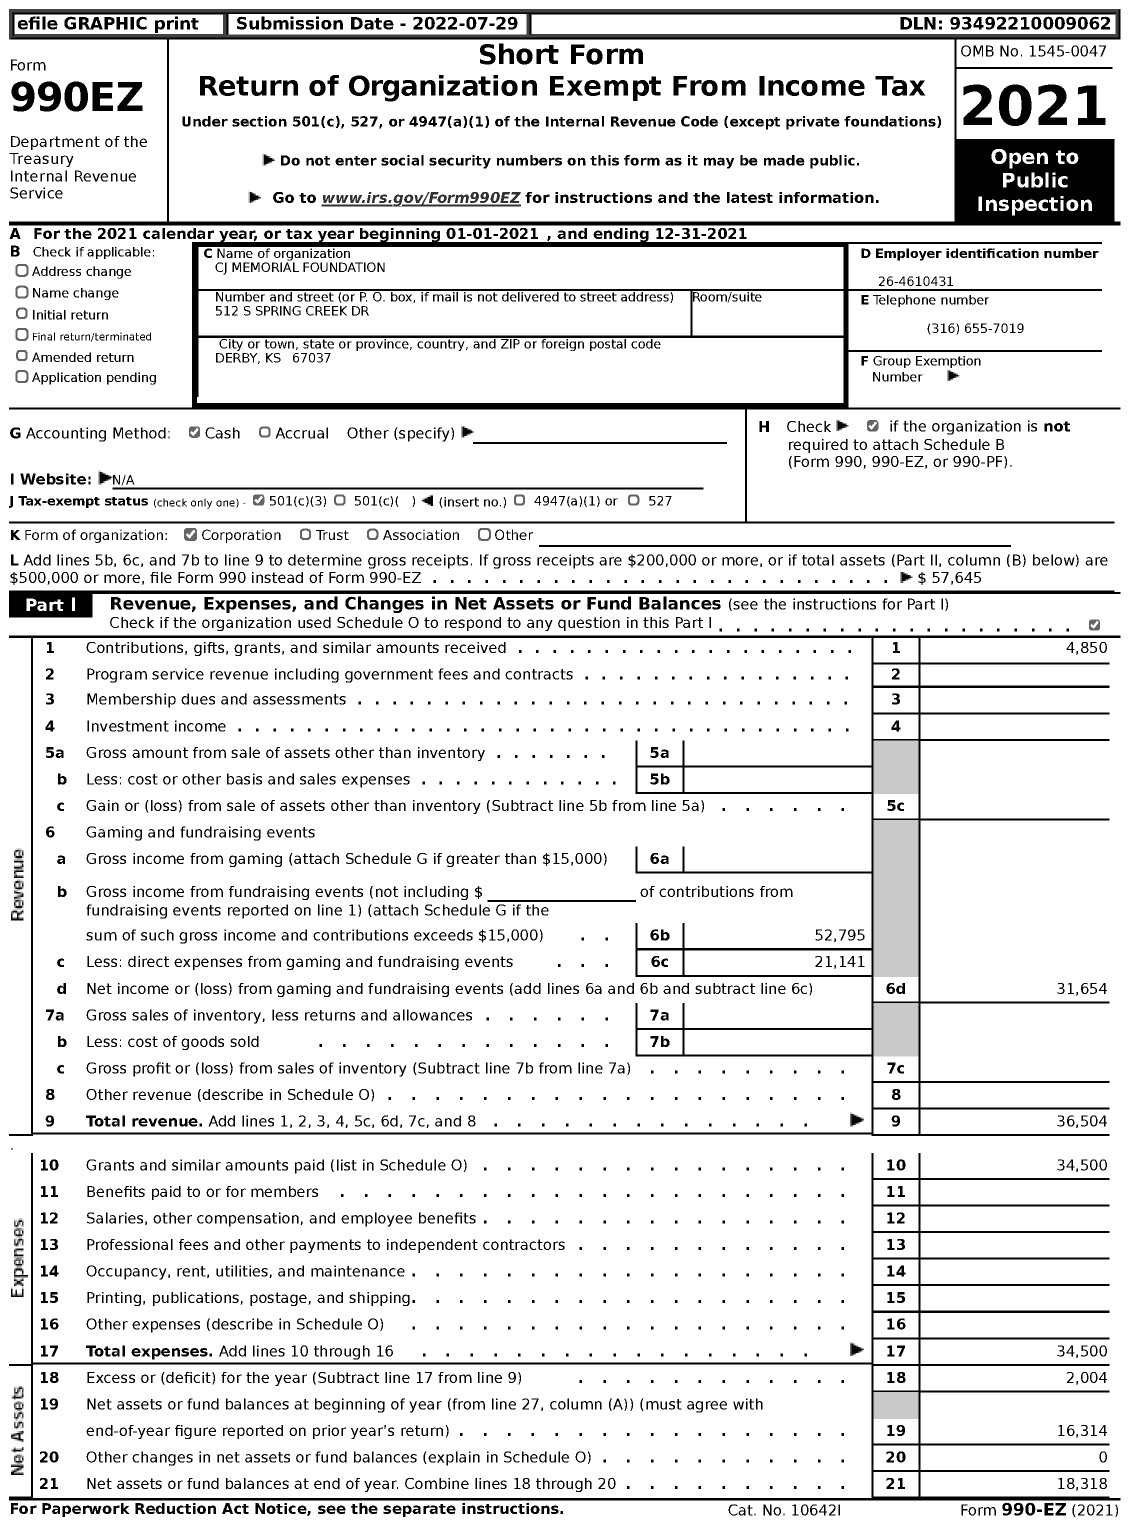 Image of first page of 2021 Form 990EZ for CJ Memorial Foundation